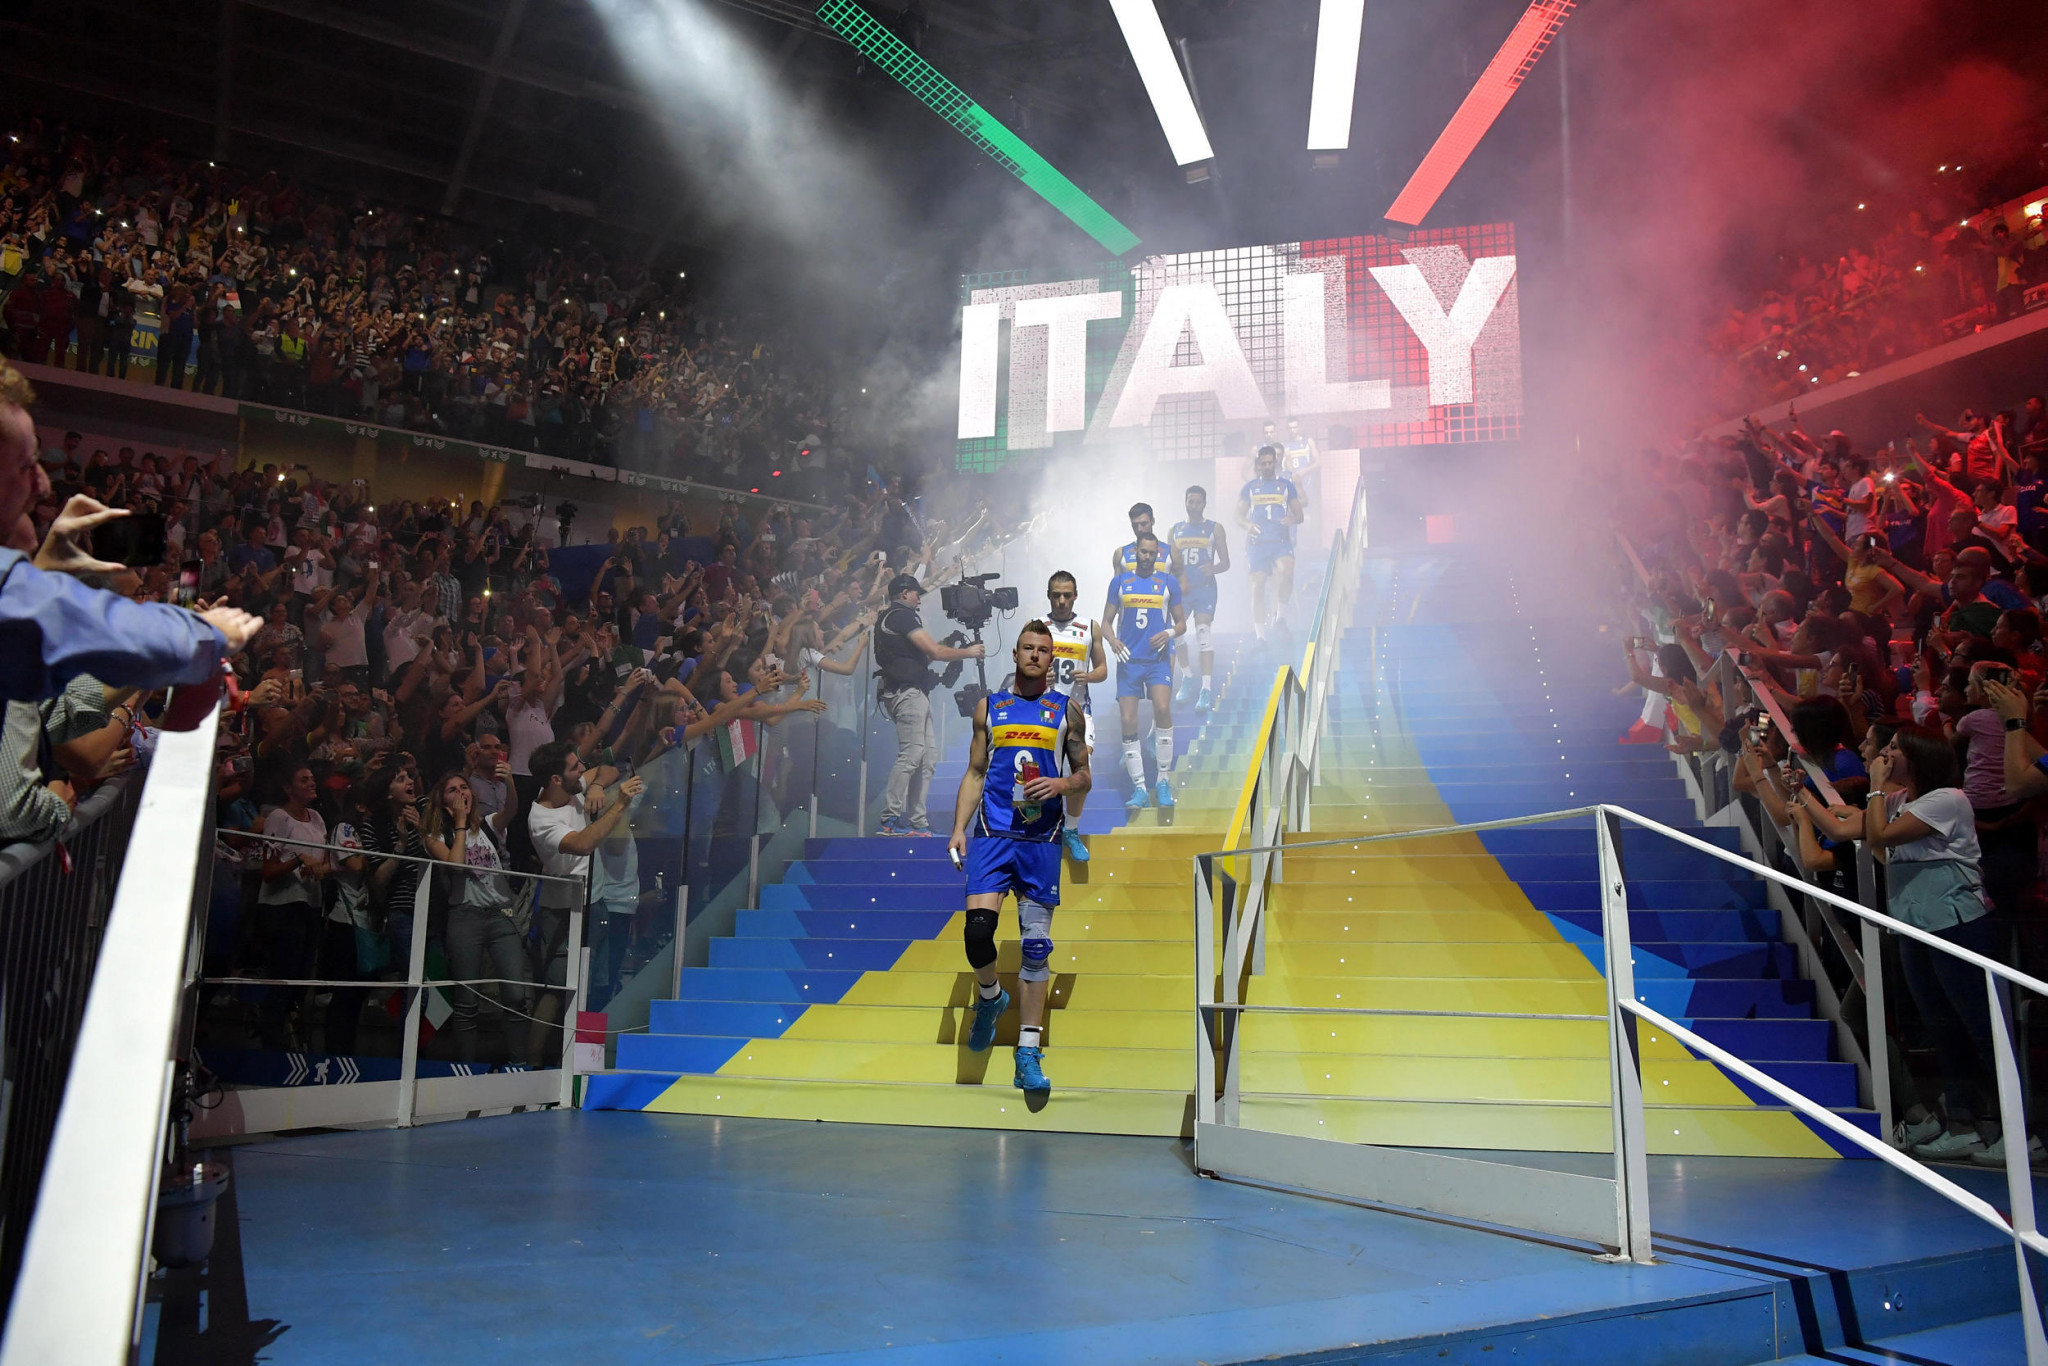 Turin will host the 2020 Volleyball Nations League men's finals ©FIVB